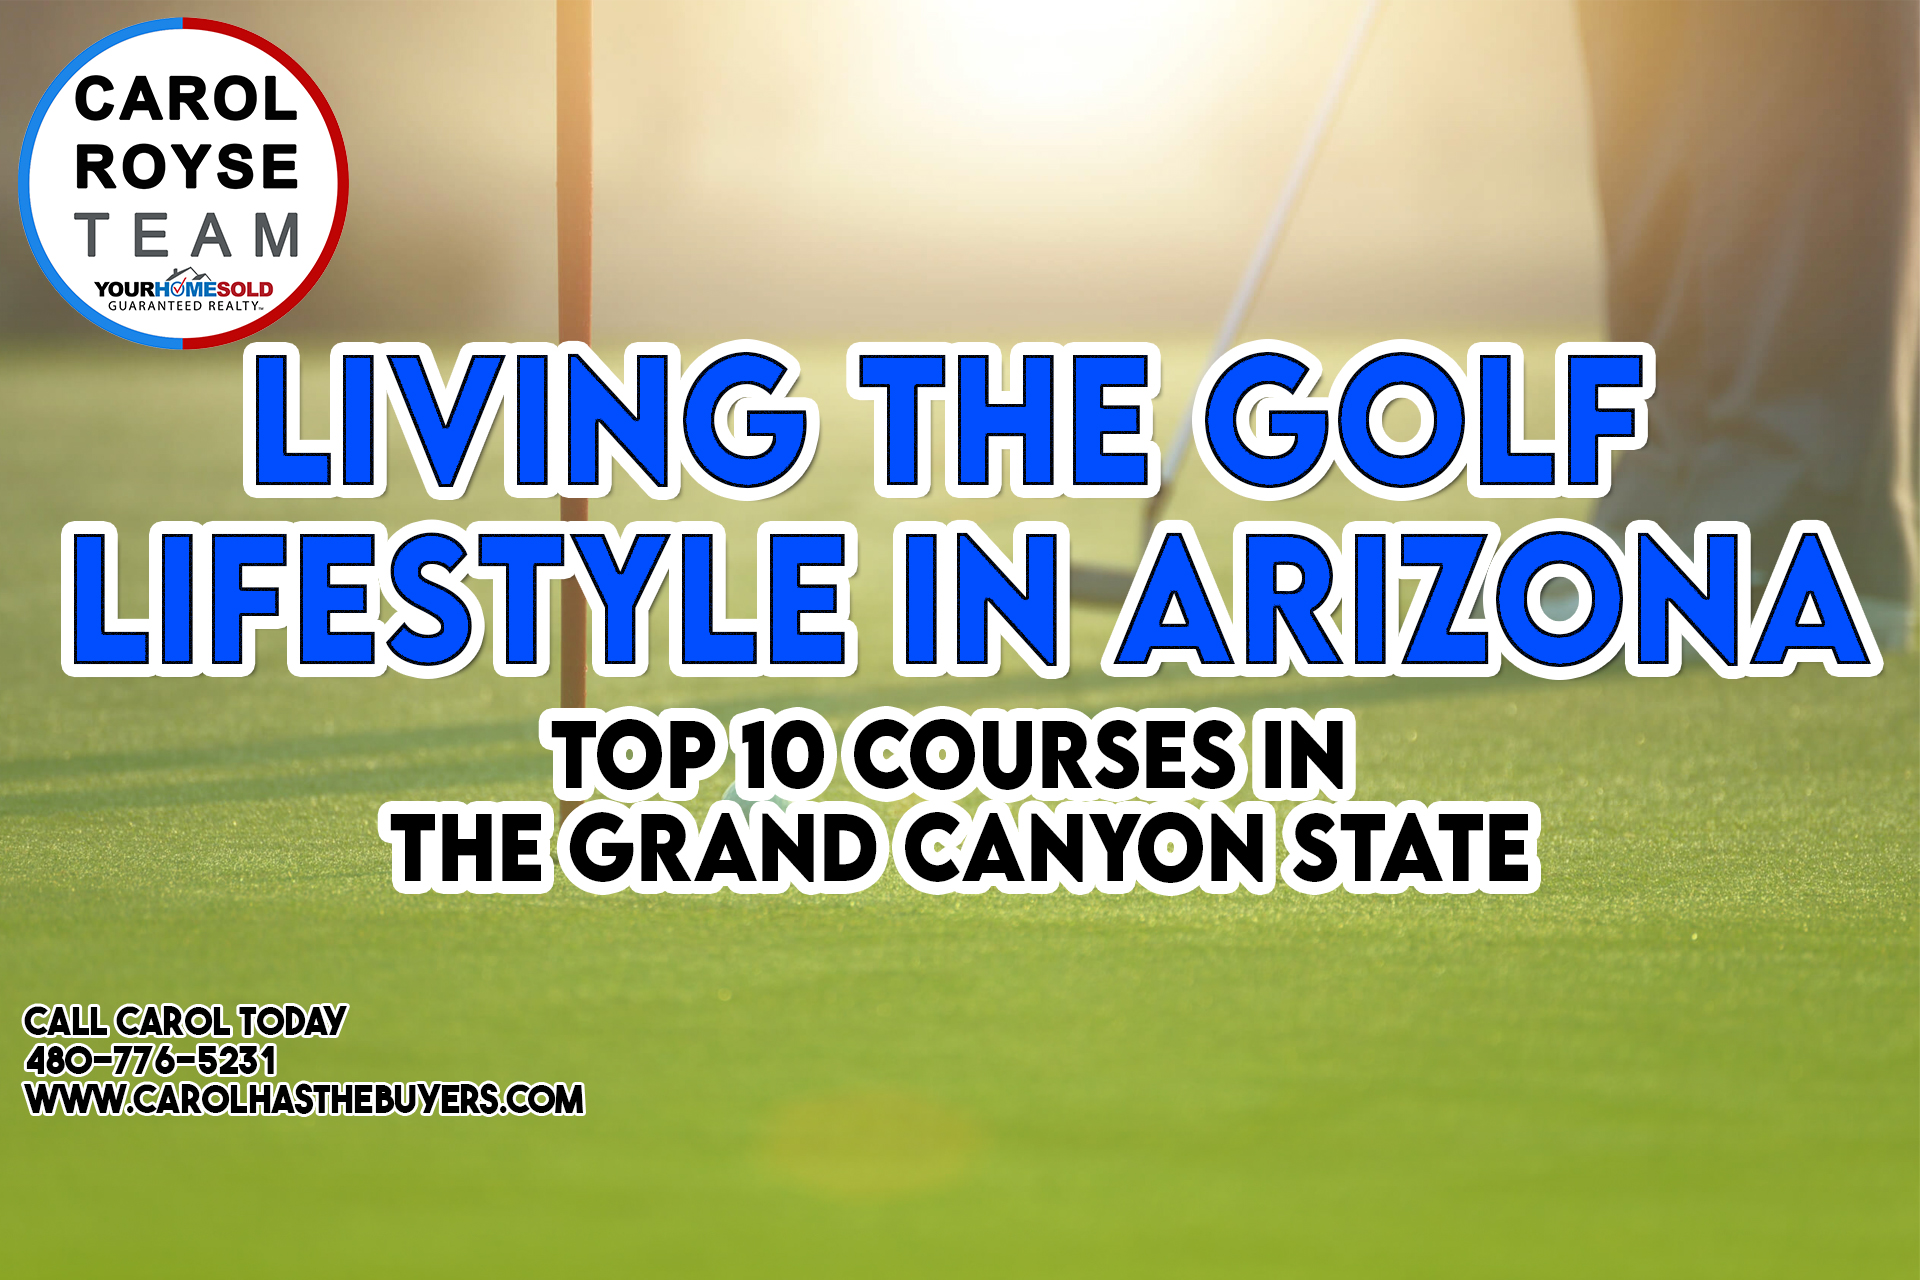 <strong>Living the Golf Lifestyle in Arizona: Top 10 Courses in The Grand Canyon State</strong>